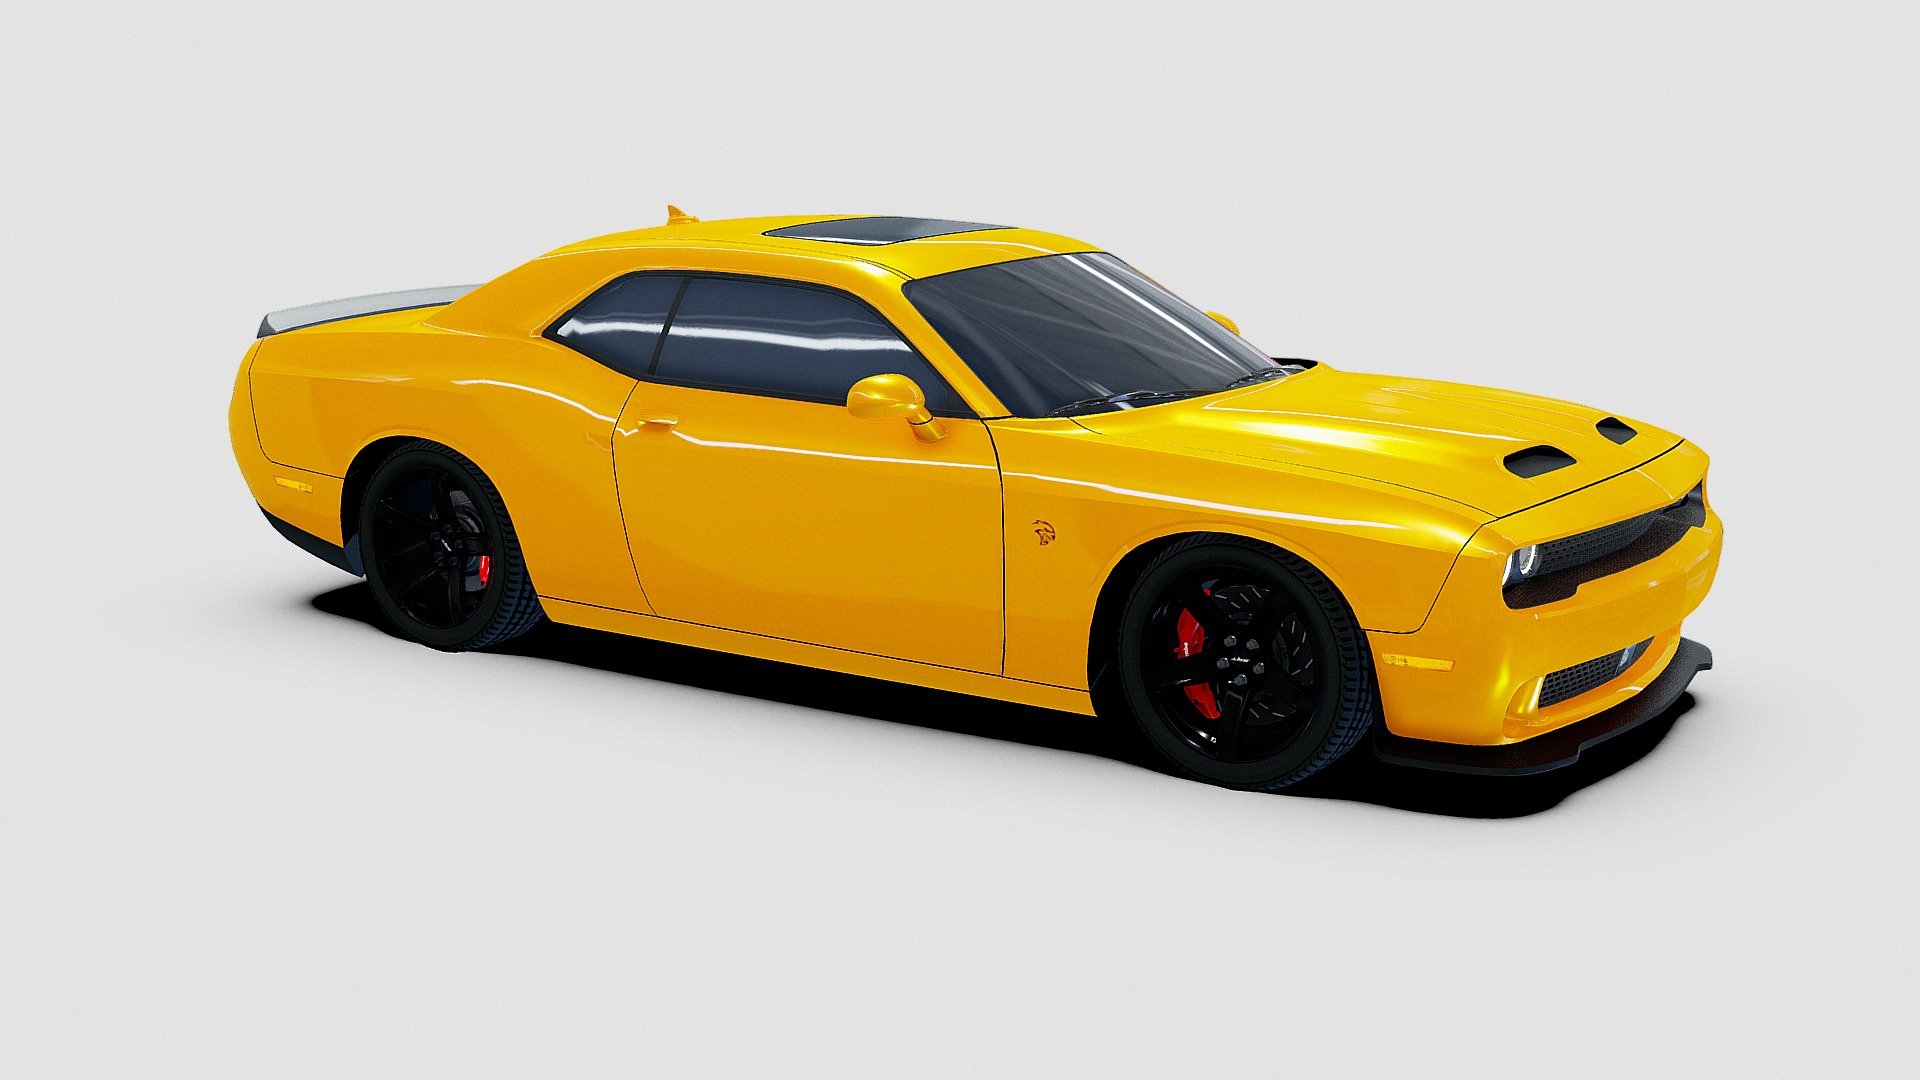 Dodge Challenger HellCat 2019
Modeled in Modo, textures baked with Marmoset Toolbag 3, Quixel Tools / Photoshop.
Retopo / Modeling / Texturing / Baking Work Made by Alfredo Rocha
PolyCrunching work by Adriana Diaz &amp; Alfredo Rocha - Dodge Challenger HellCat 2019 - Buy Royalty Free 3D model by doncha_magoso 3d model